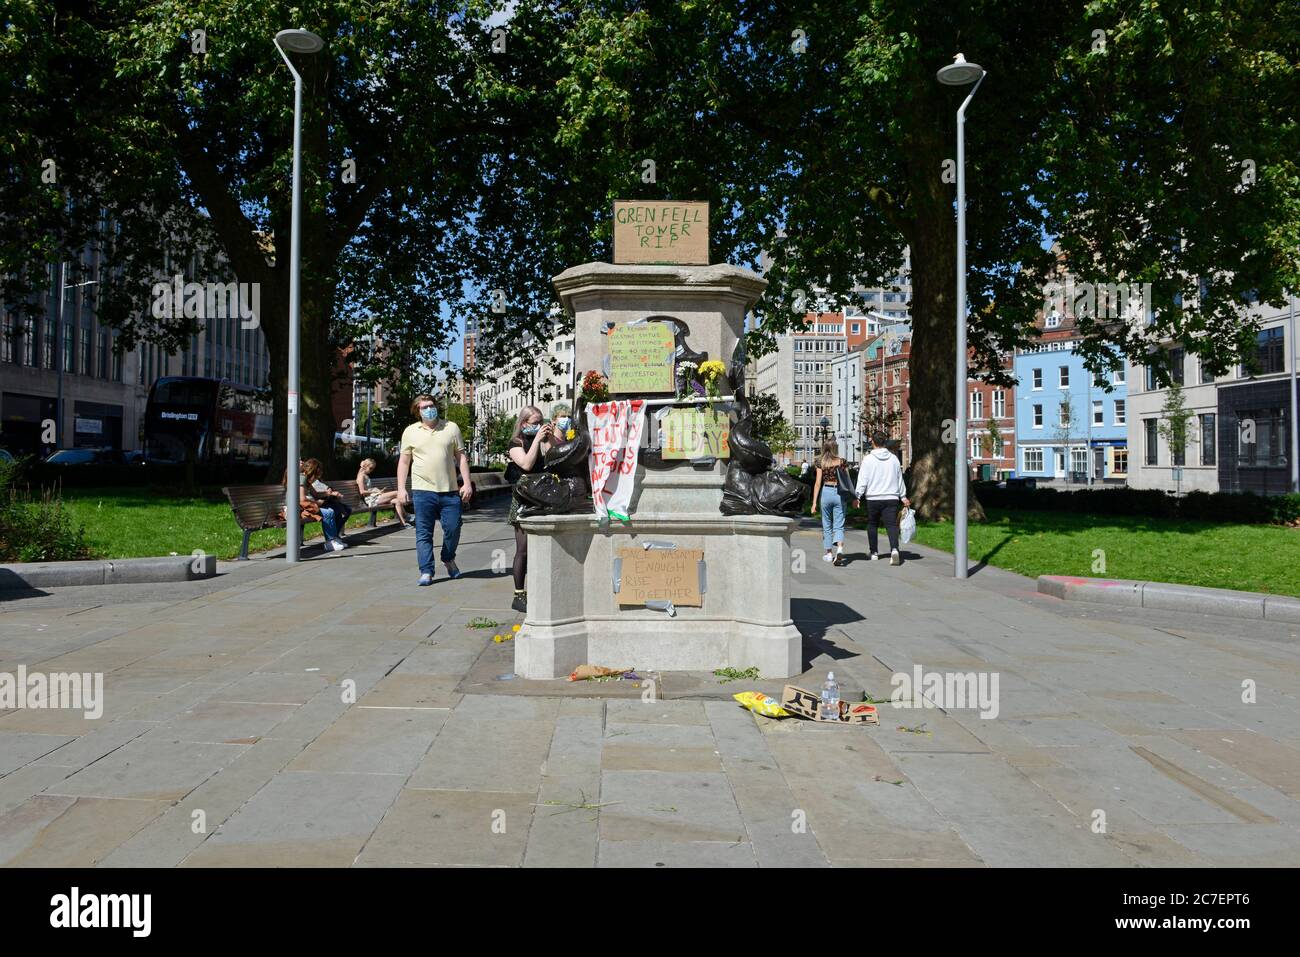 The plinth on which the 'A Surge of Power (Jen Reid)' statue stood  for just one day in July 2020 in Bristol, UK, after removal, with many messages. Stock Photo